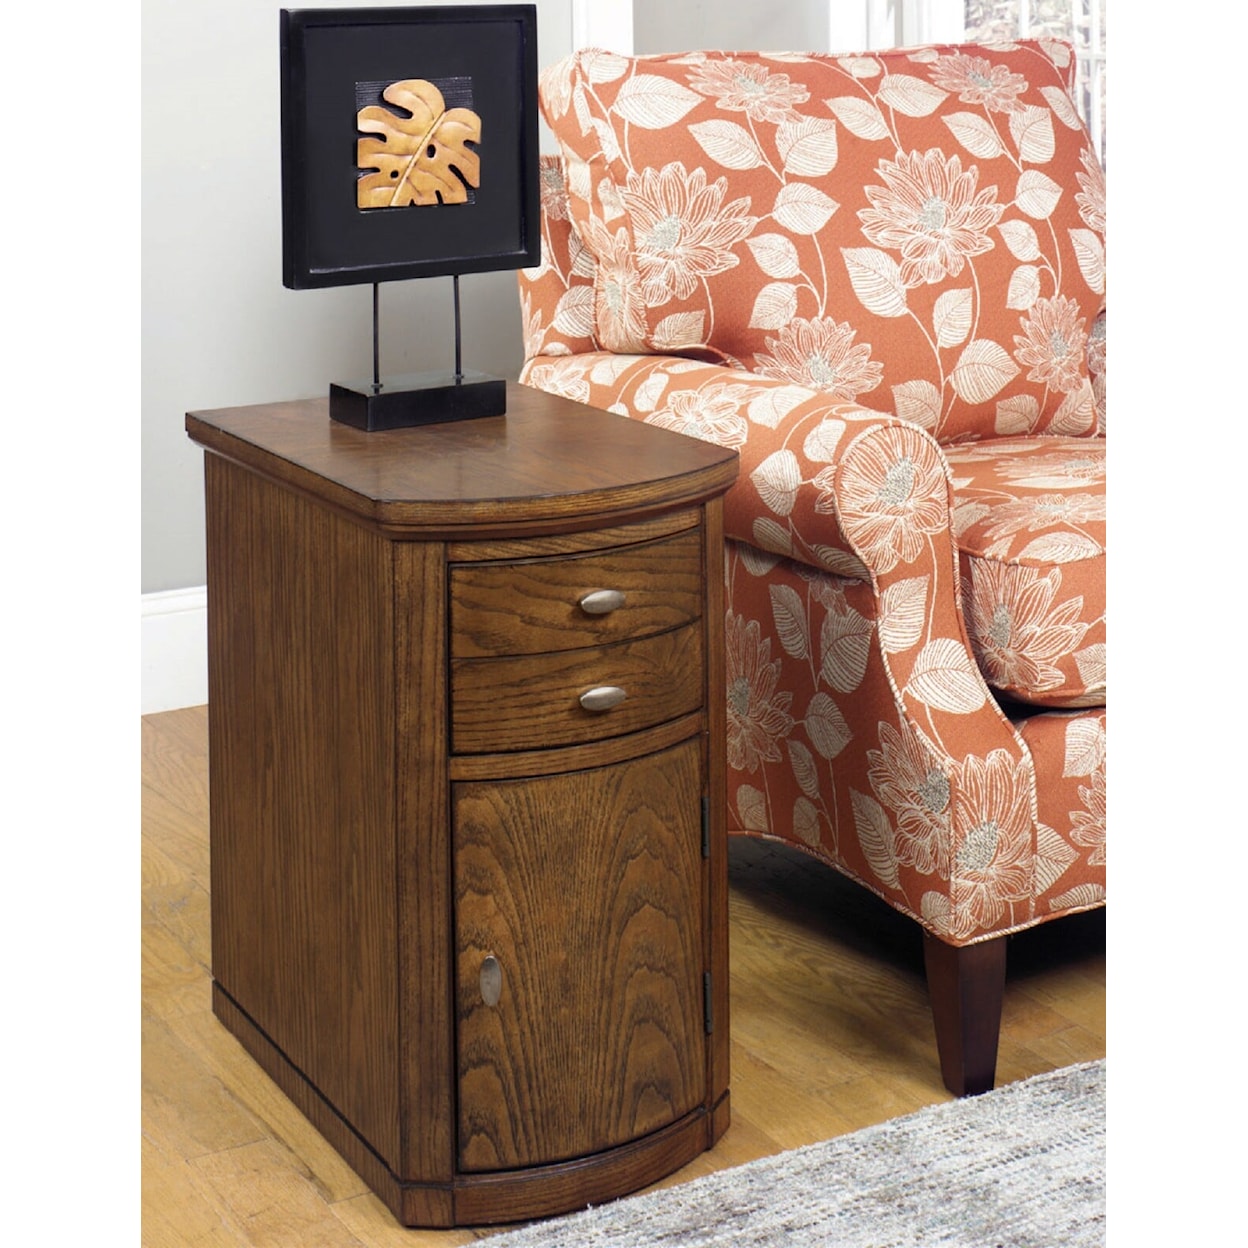 Null Furniture 2016 - Newport Chairside Cabinet